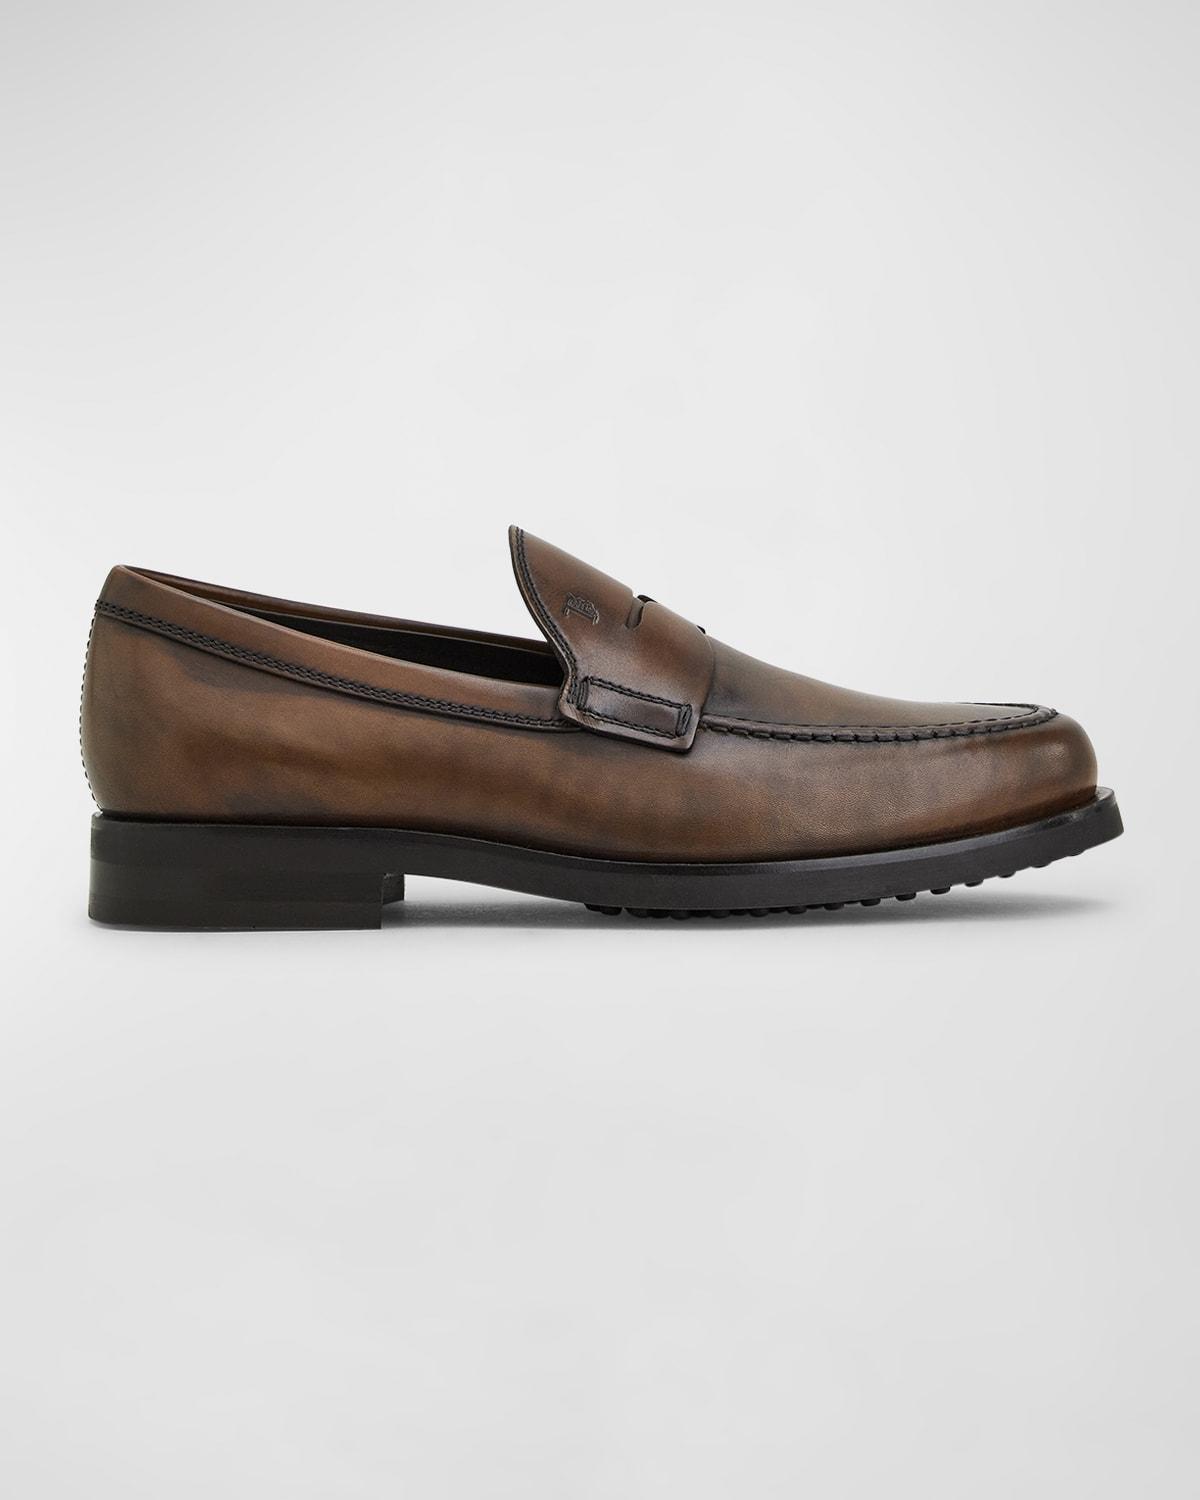 Tods Formale Penny Loafer Product Image